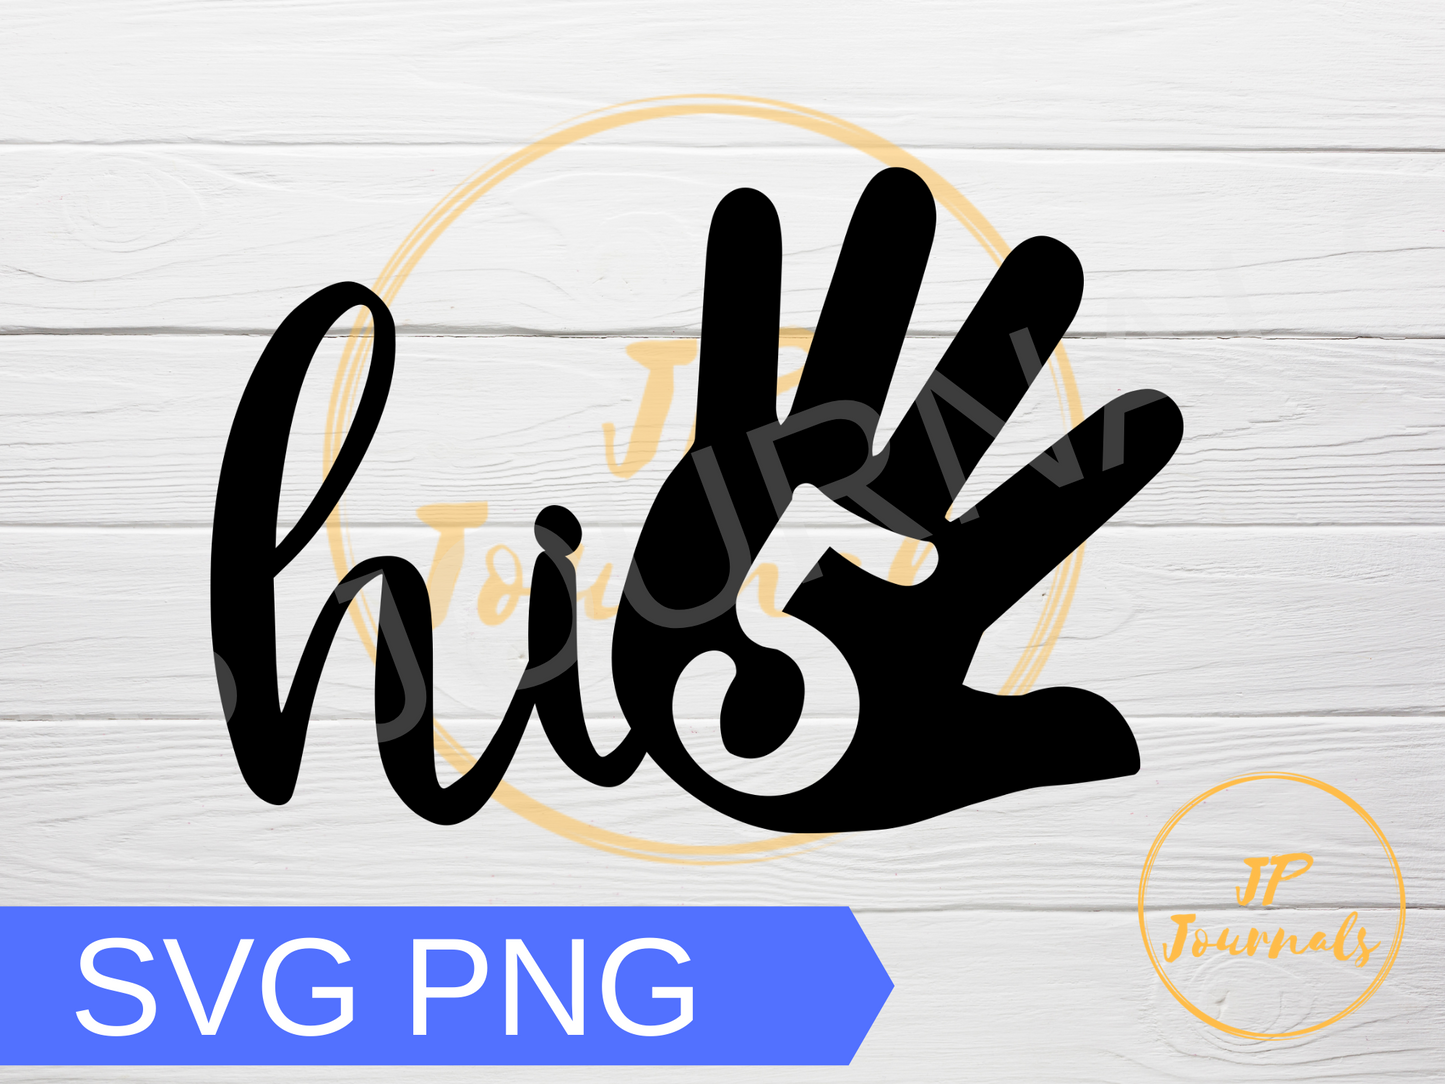 Hi Five Birthday Party, High Five Birthday Party SVG Cut File, Hi 5 Cupcake Topper Template, High Five Party Favor